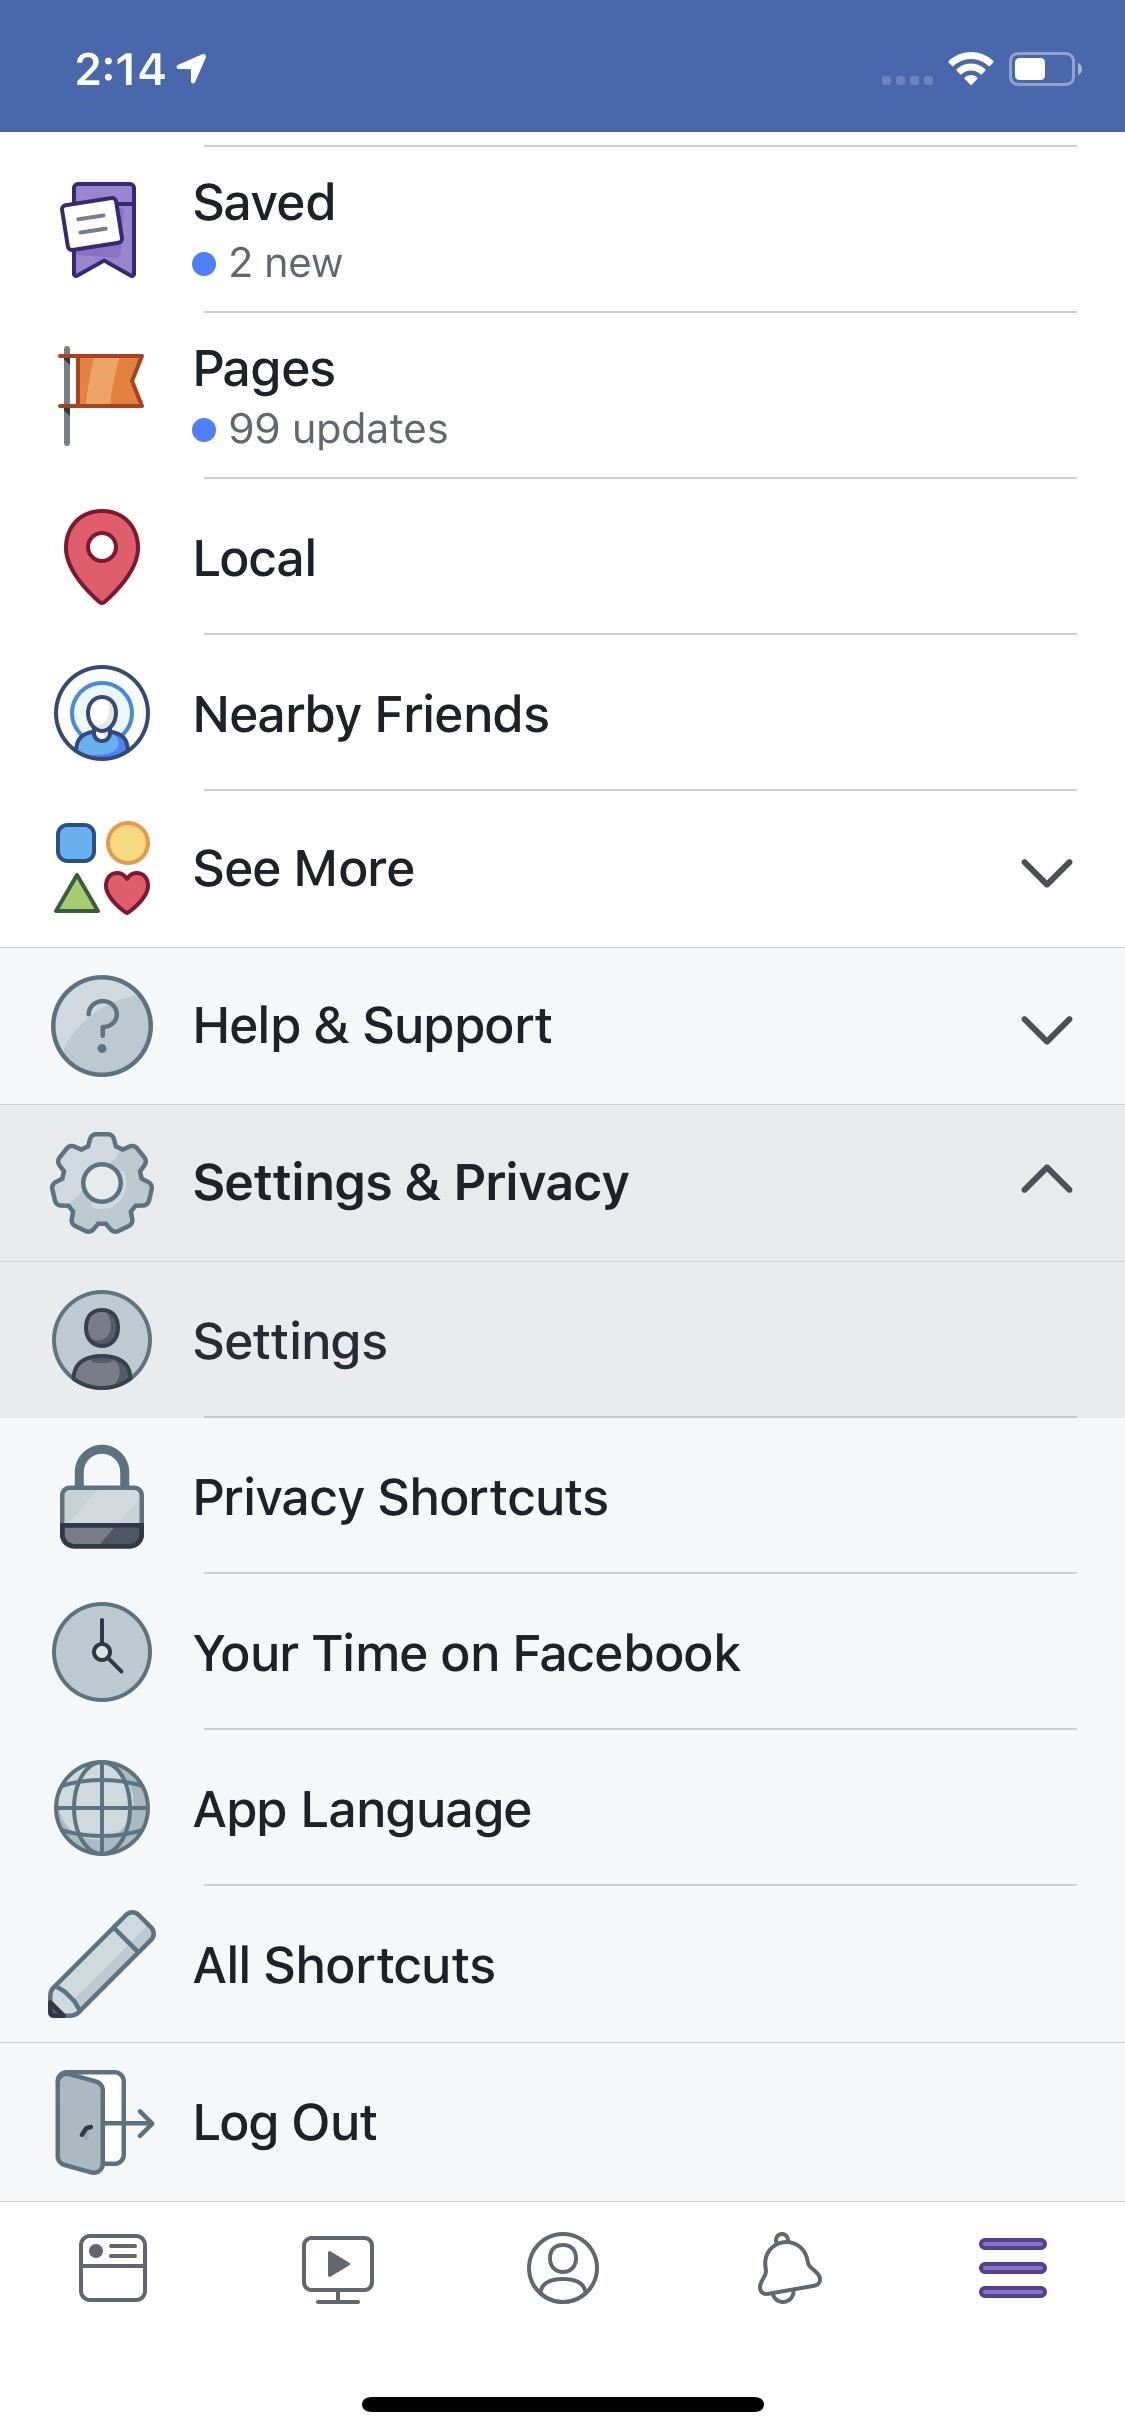 How to Keep Facebook from Tracking Your Location When You're Not Using the App